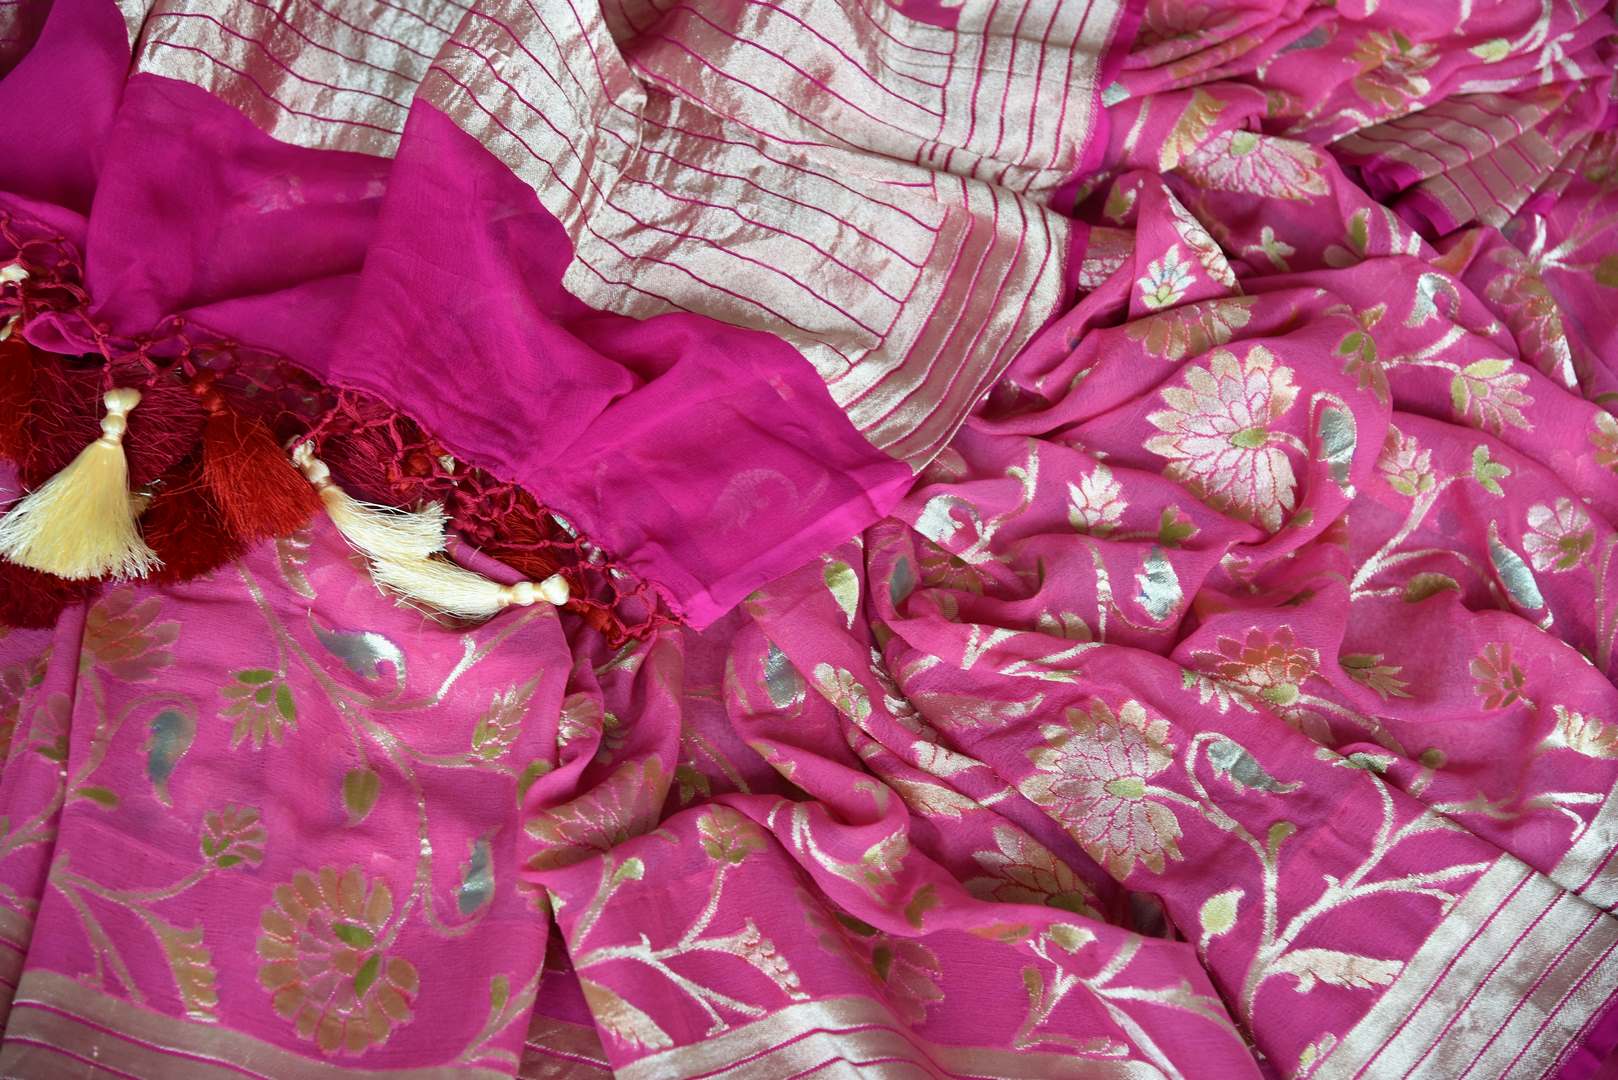 Shop pink georgette Banarasi sari online in USA with overall floral zari design. Elevate your traditional saree style with beautiful Indian Banarasi saris from Pure Elegance Indian fashion store in USA. We also have a stunning variety of bridal sarees for Indian brides in USA. Shop now.-details